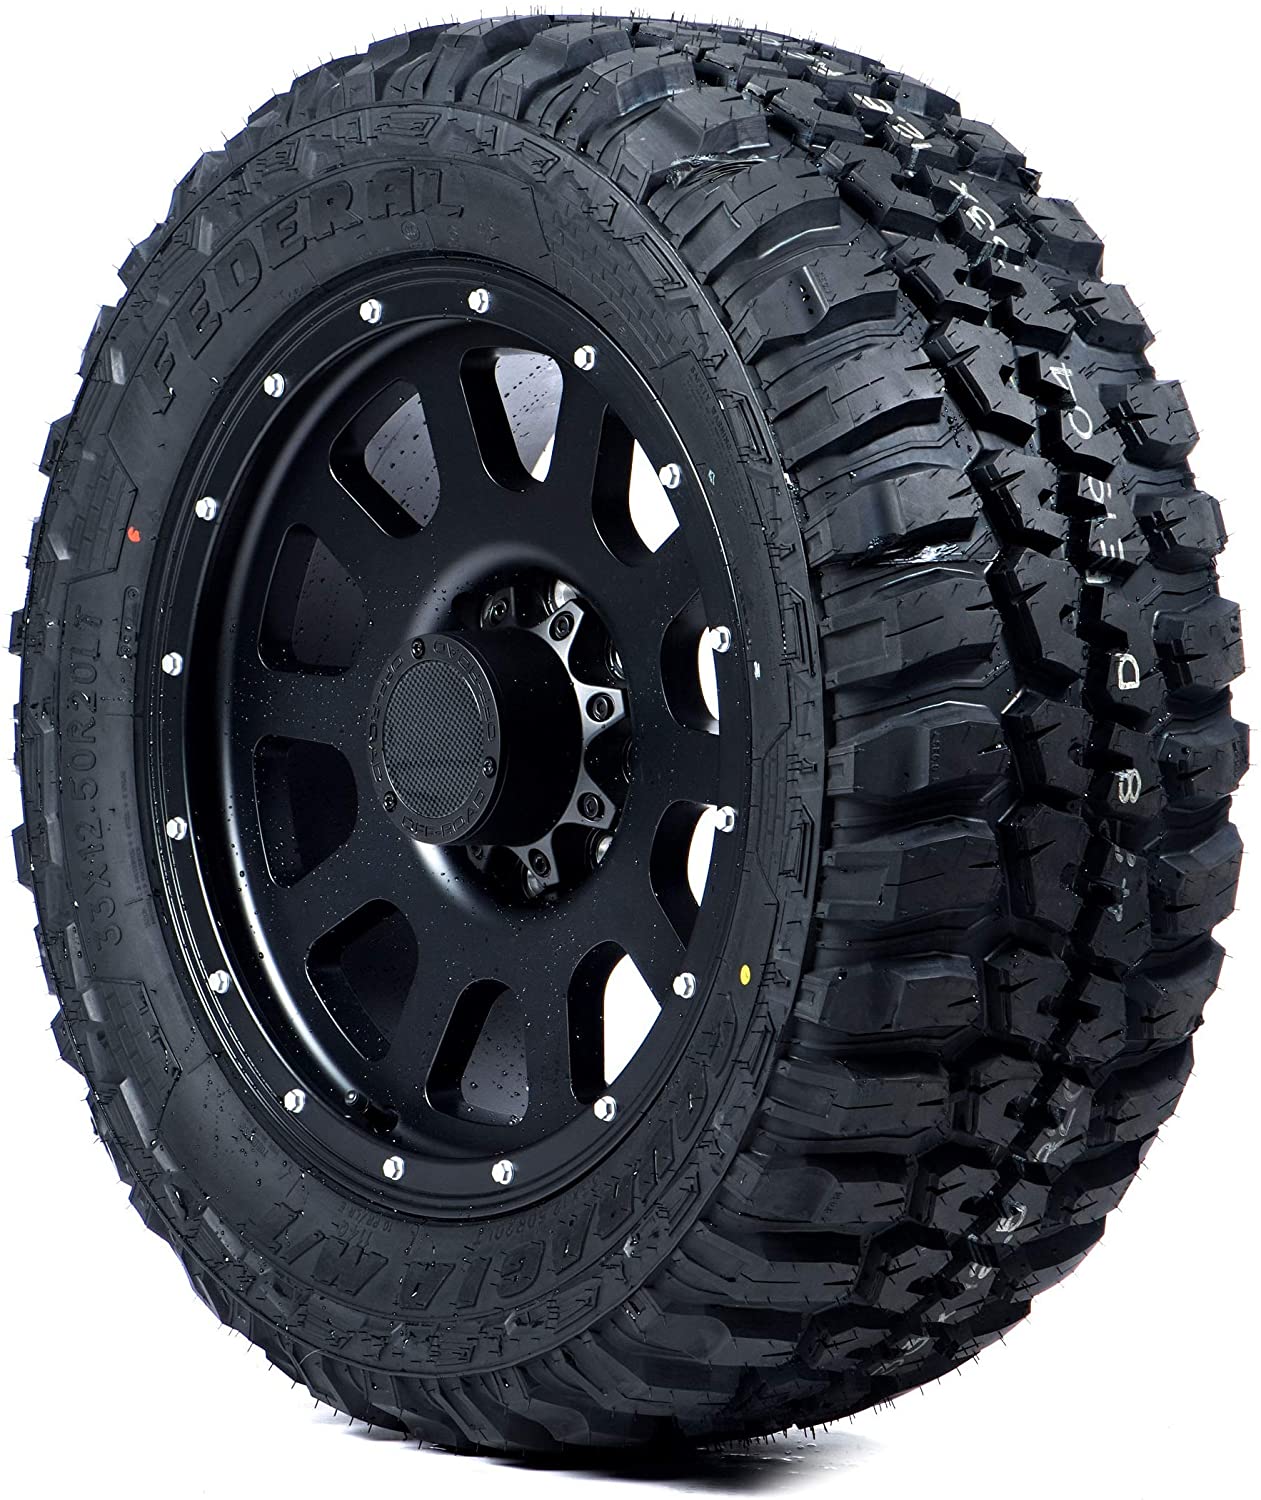 10 Best Tires For Toyota Tundra - Wonderful Engineering